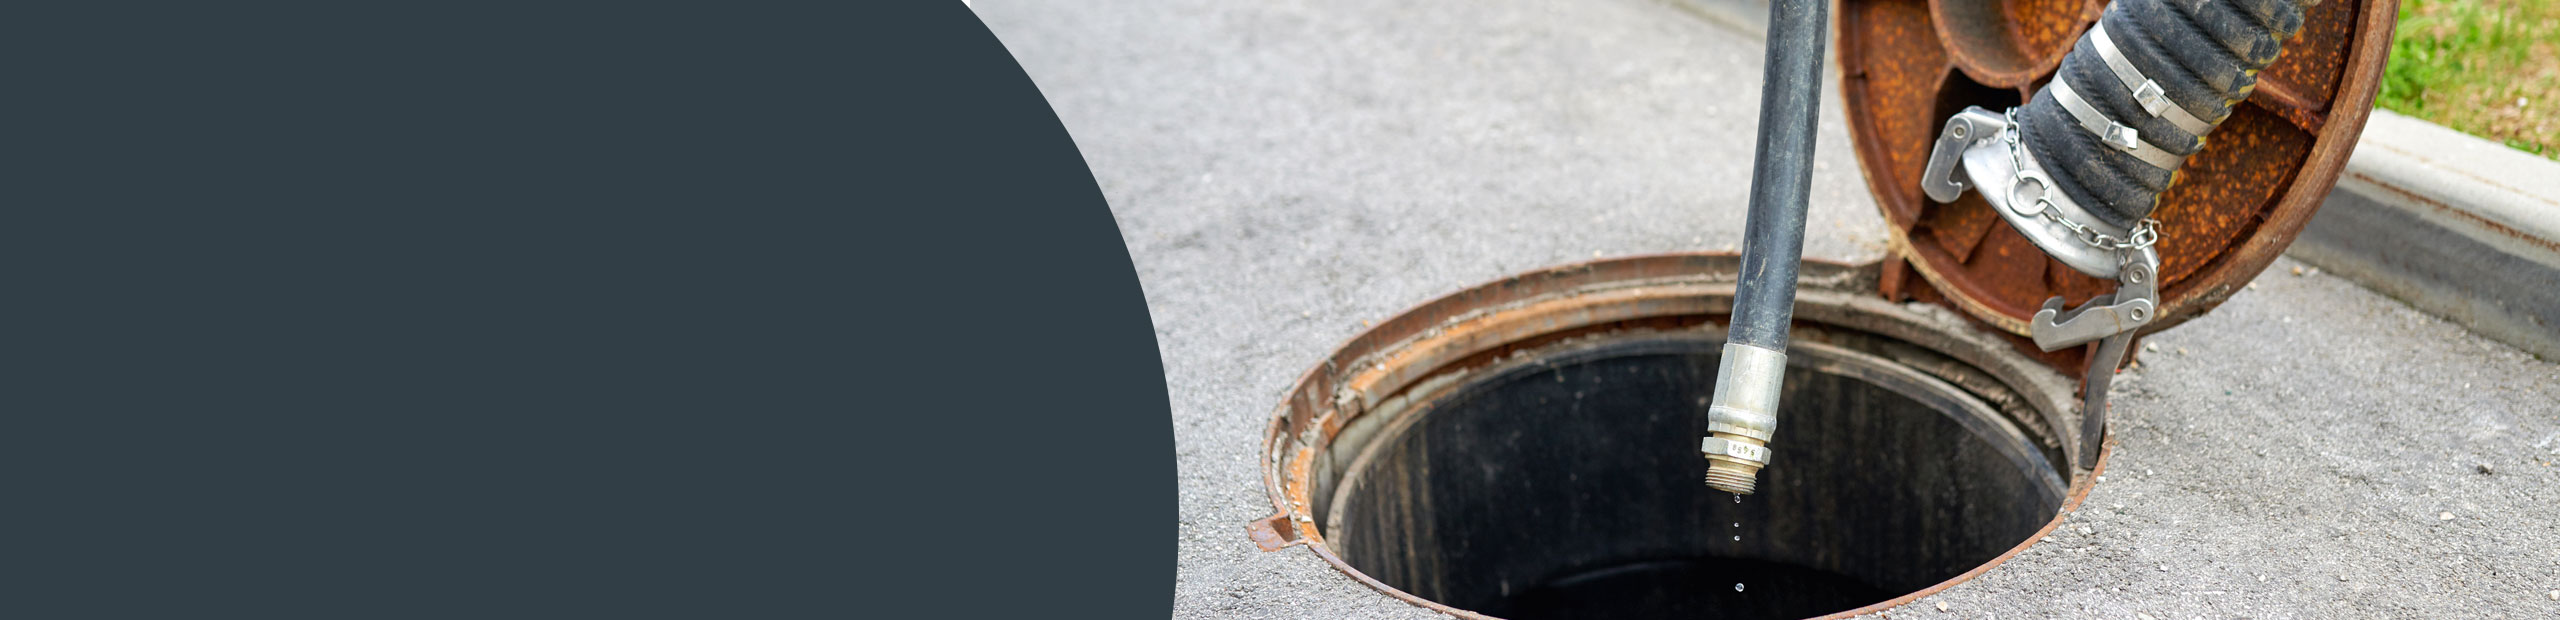 Sewage Cleaning Services - Hounslow